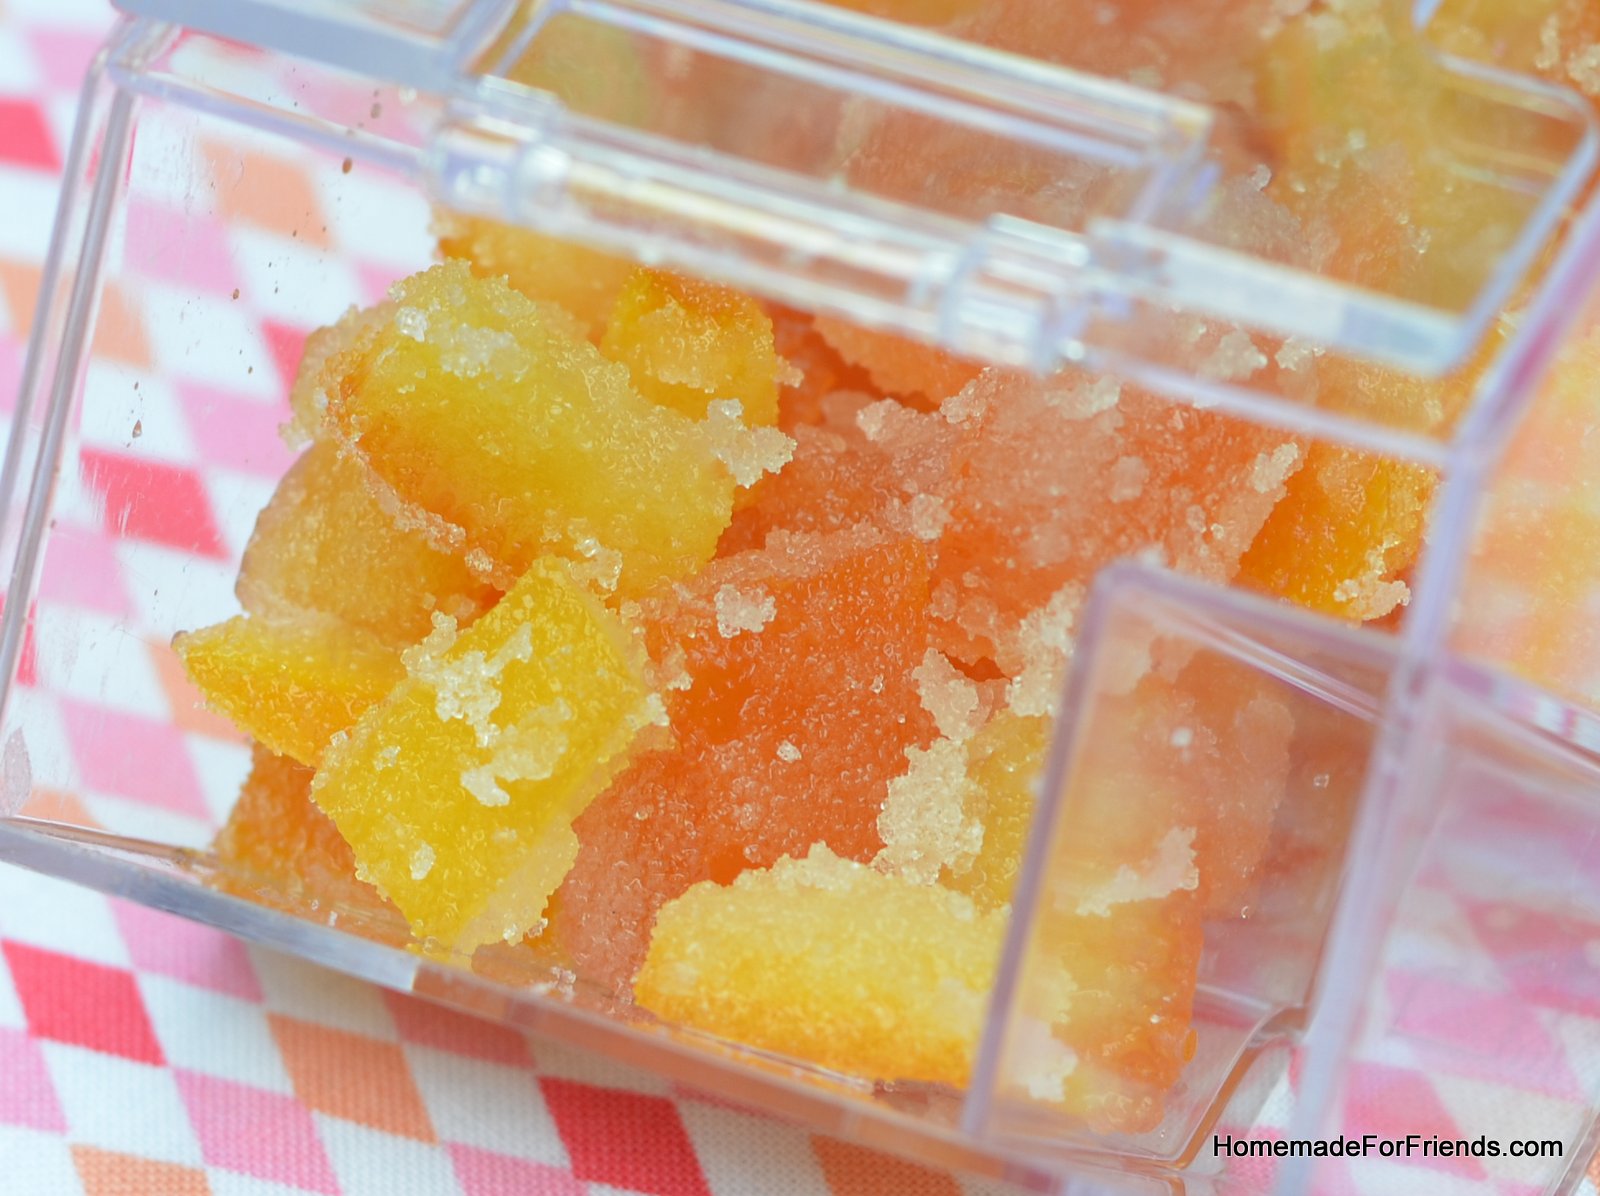 To maintain the crystalized sugar coating, store these little treats in a container that is not airtight.